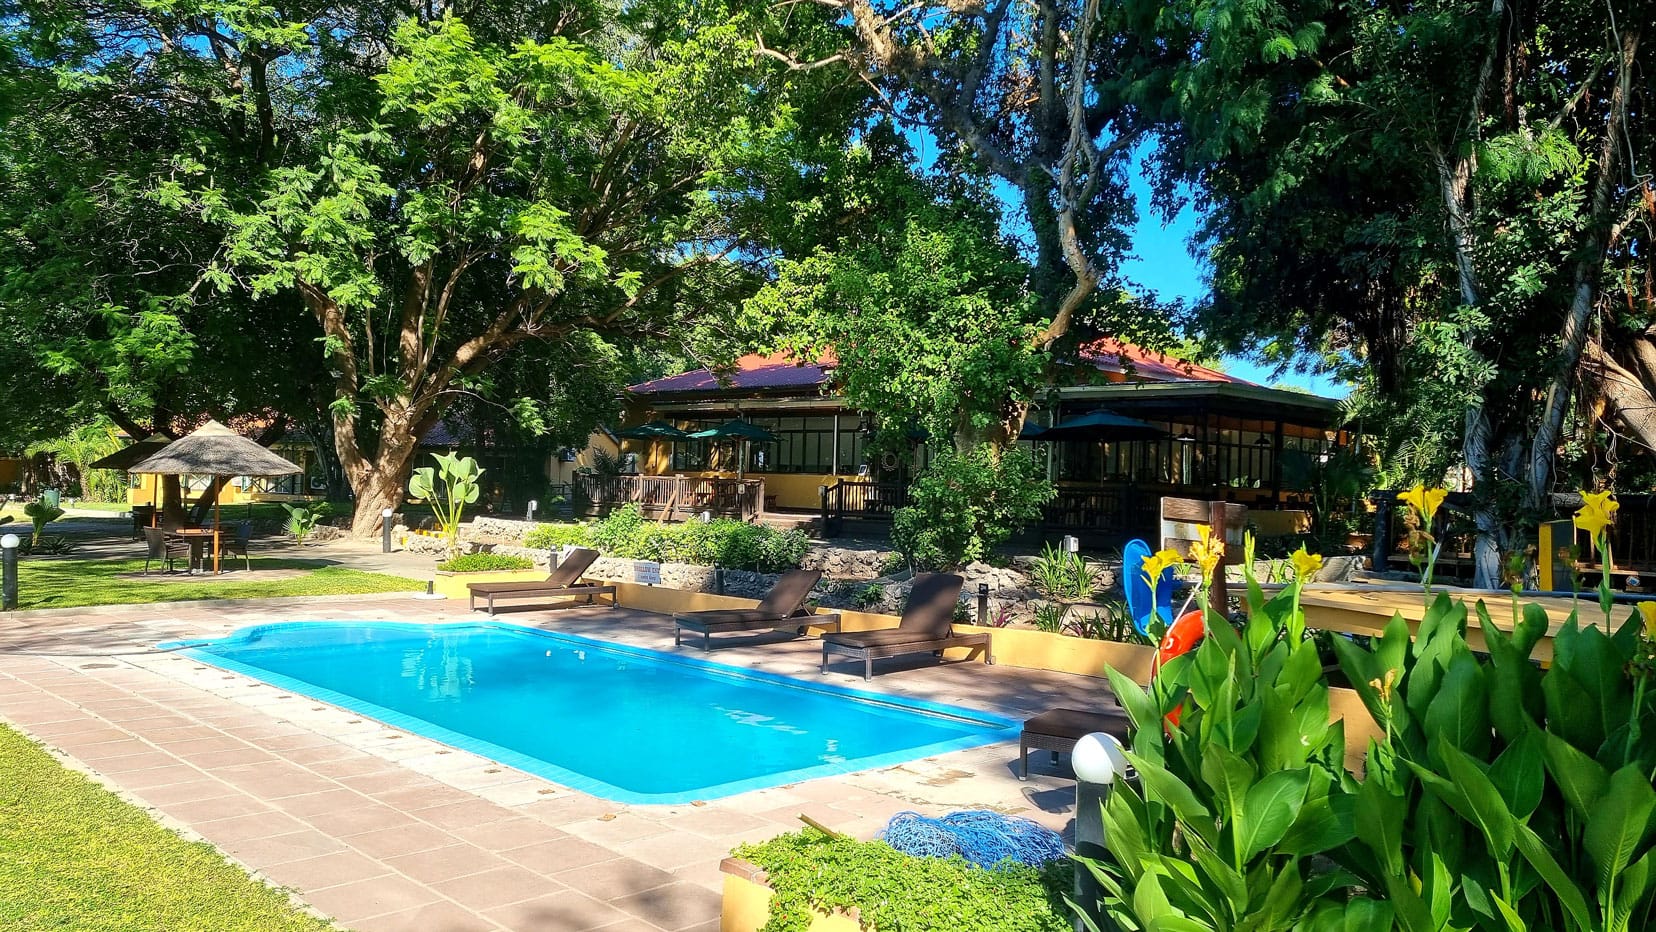 Cresta-riley-hotel-maun with swimming pool and lush gardens